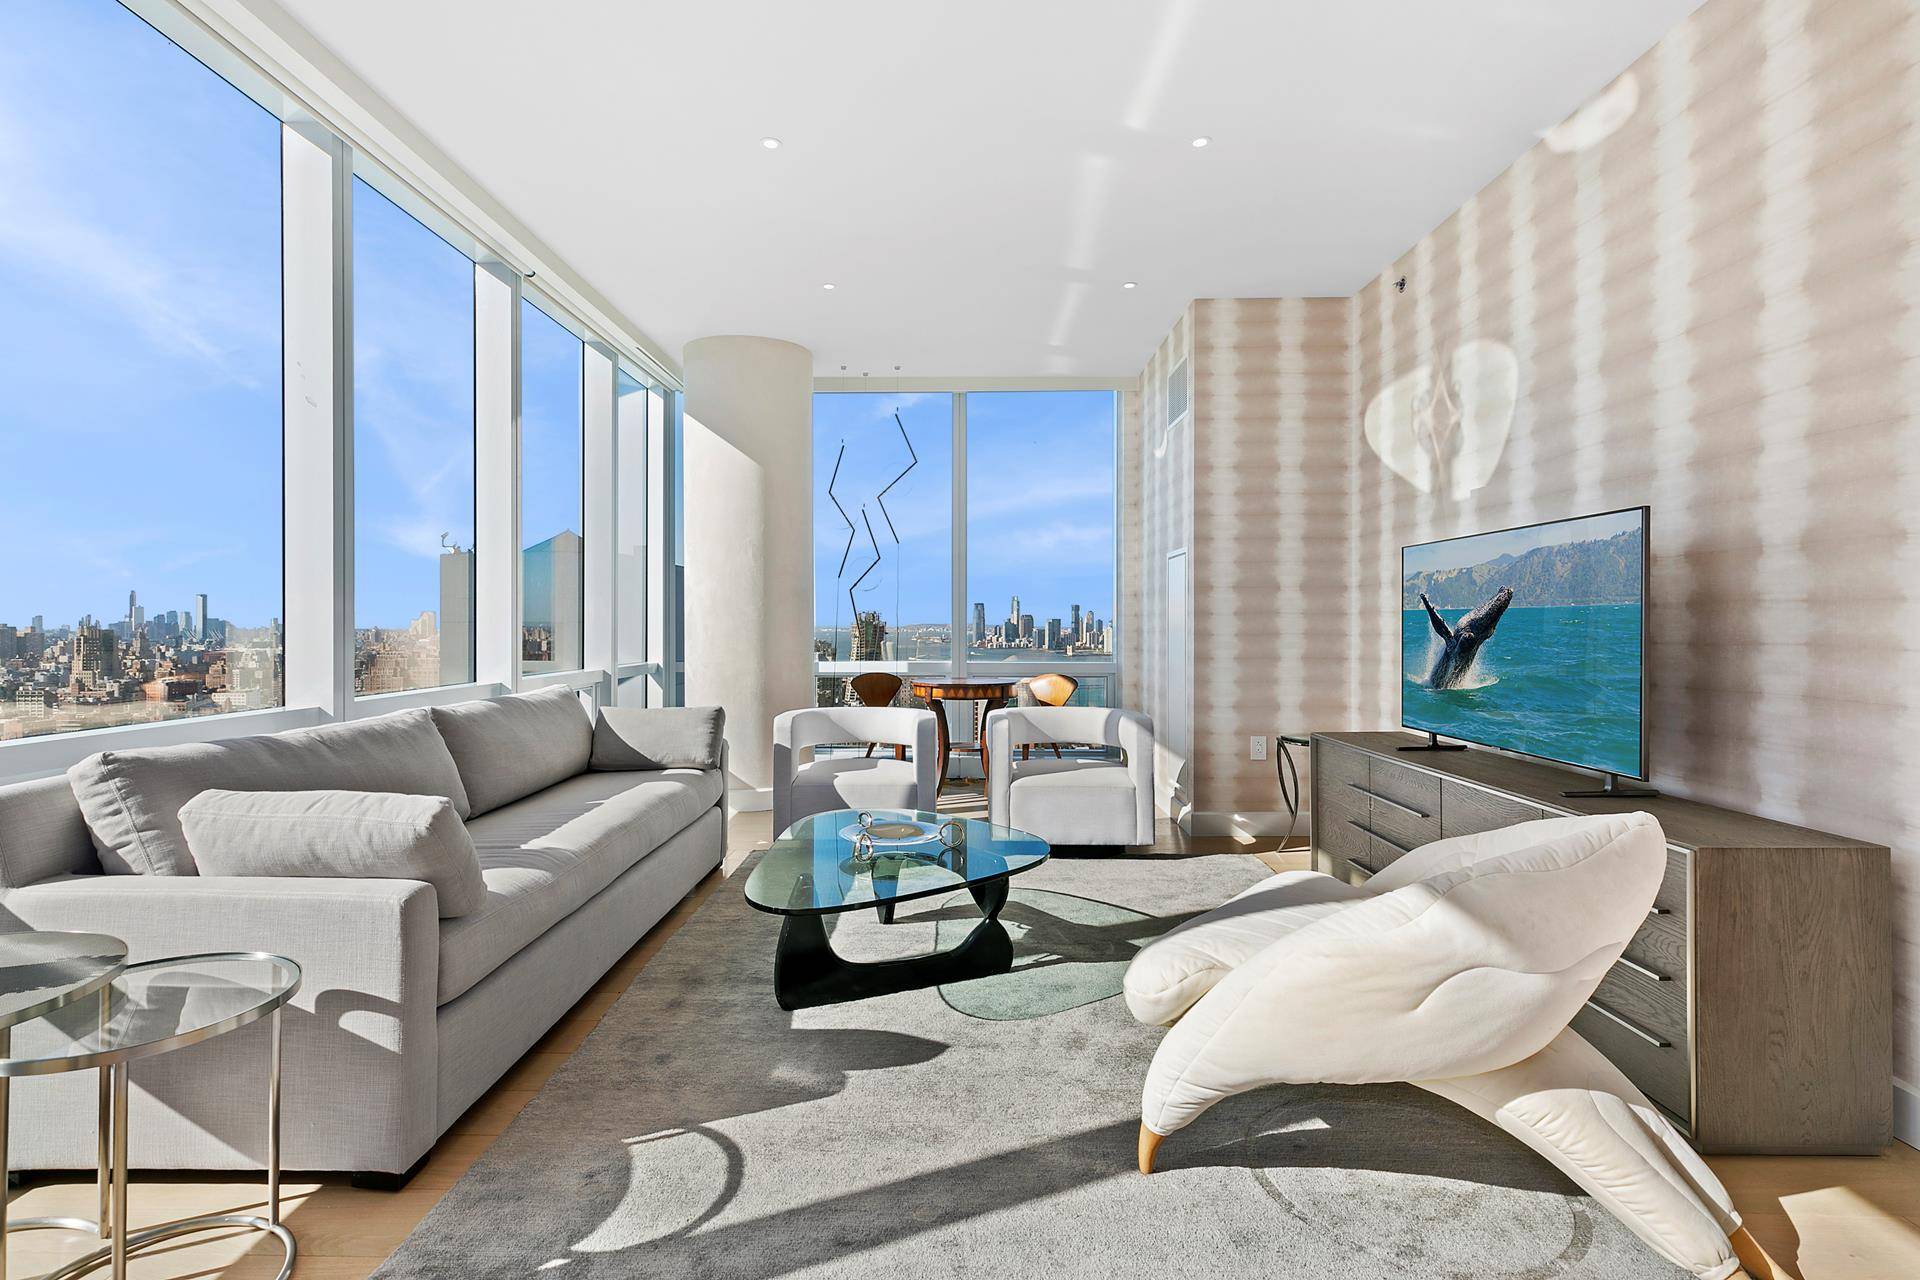 Corner 1, 777 square foot two bedroom, two and a half bath condominium combines sweeping Hudson River and New York City skyline views with the world class amenities of 15 ...